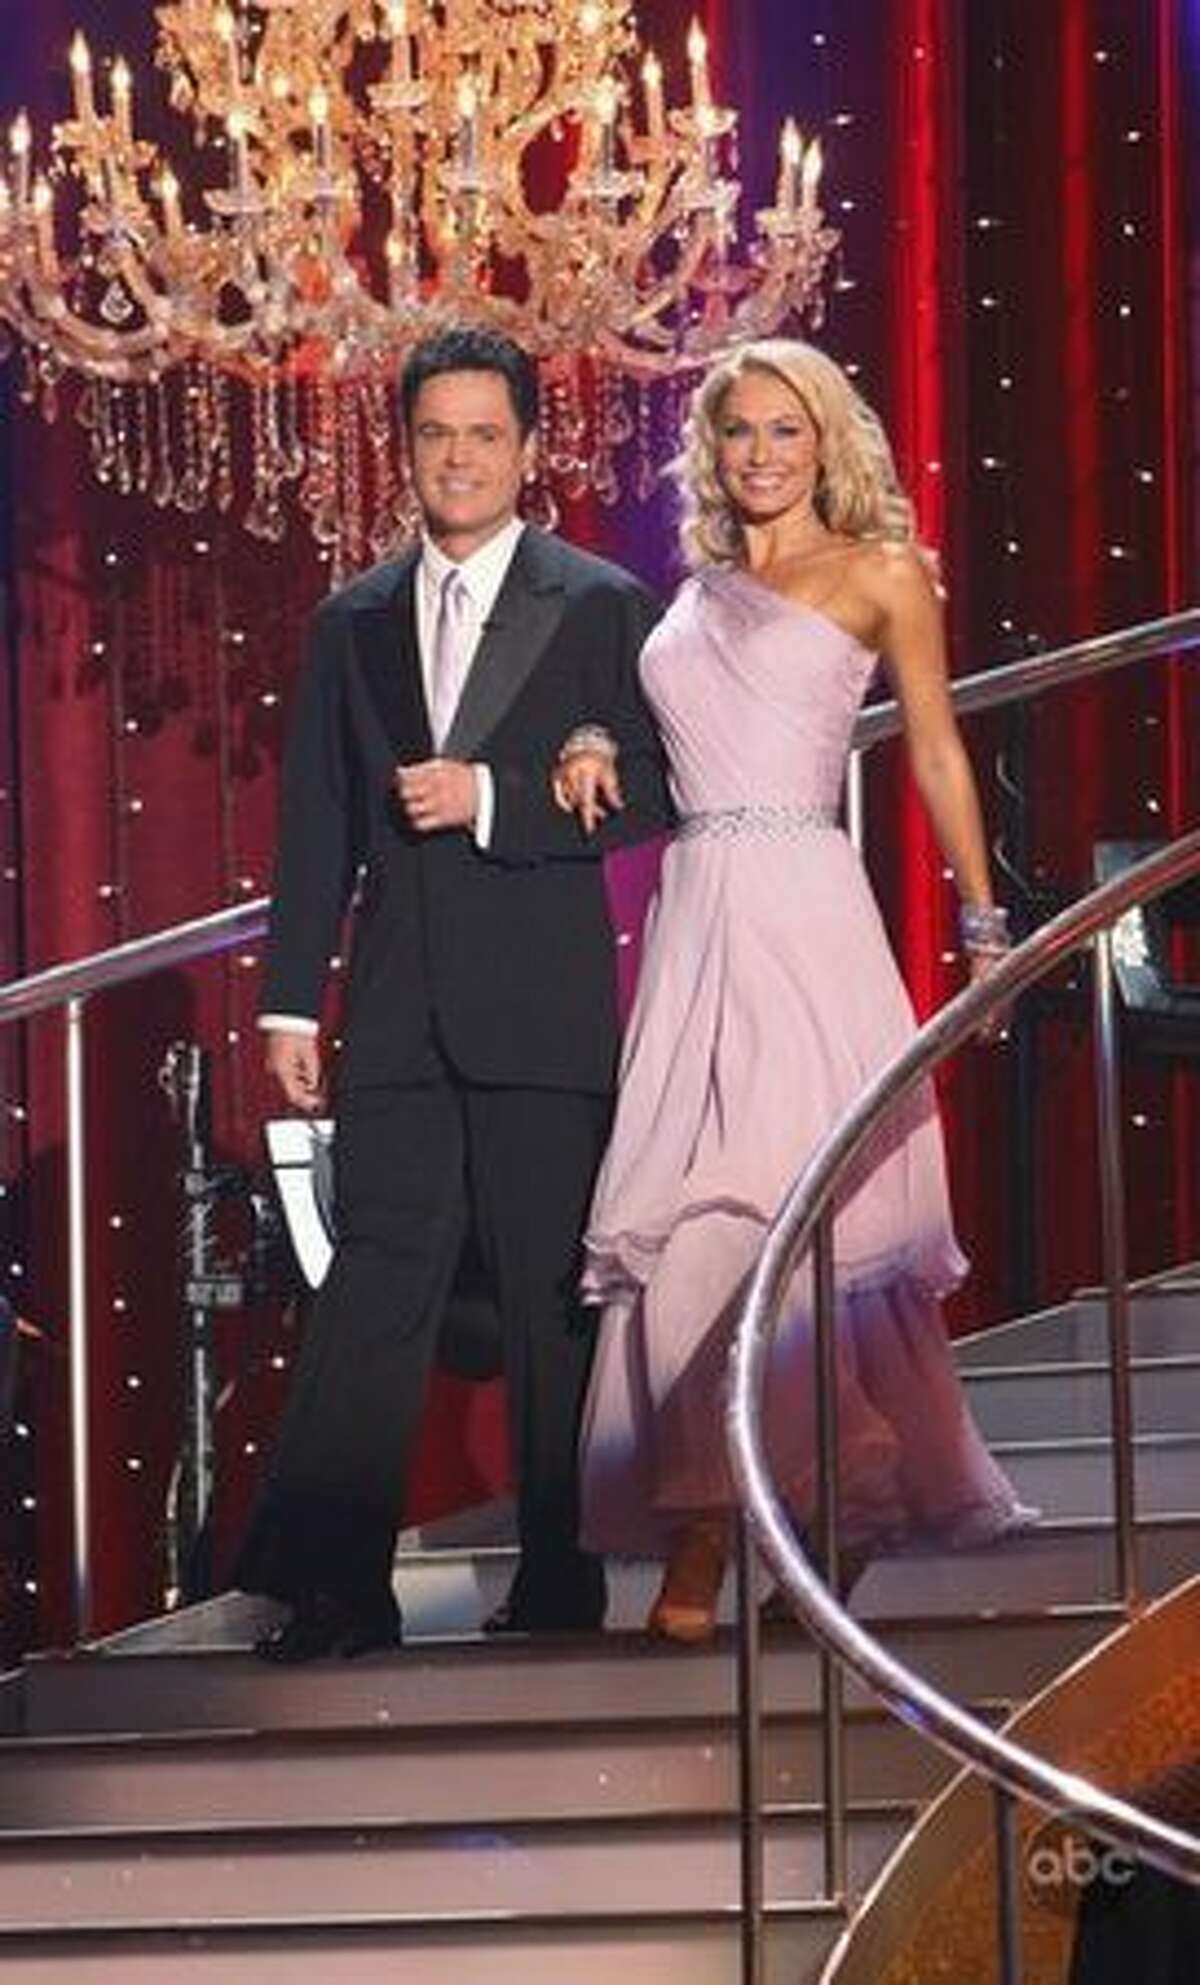 Singer Donny Osmond and professional dancer Kym Johnson are introduced.